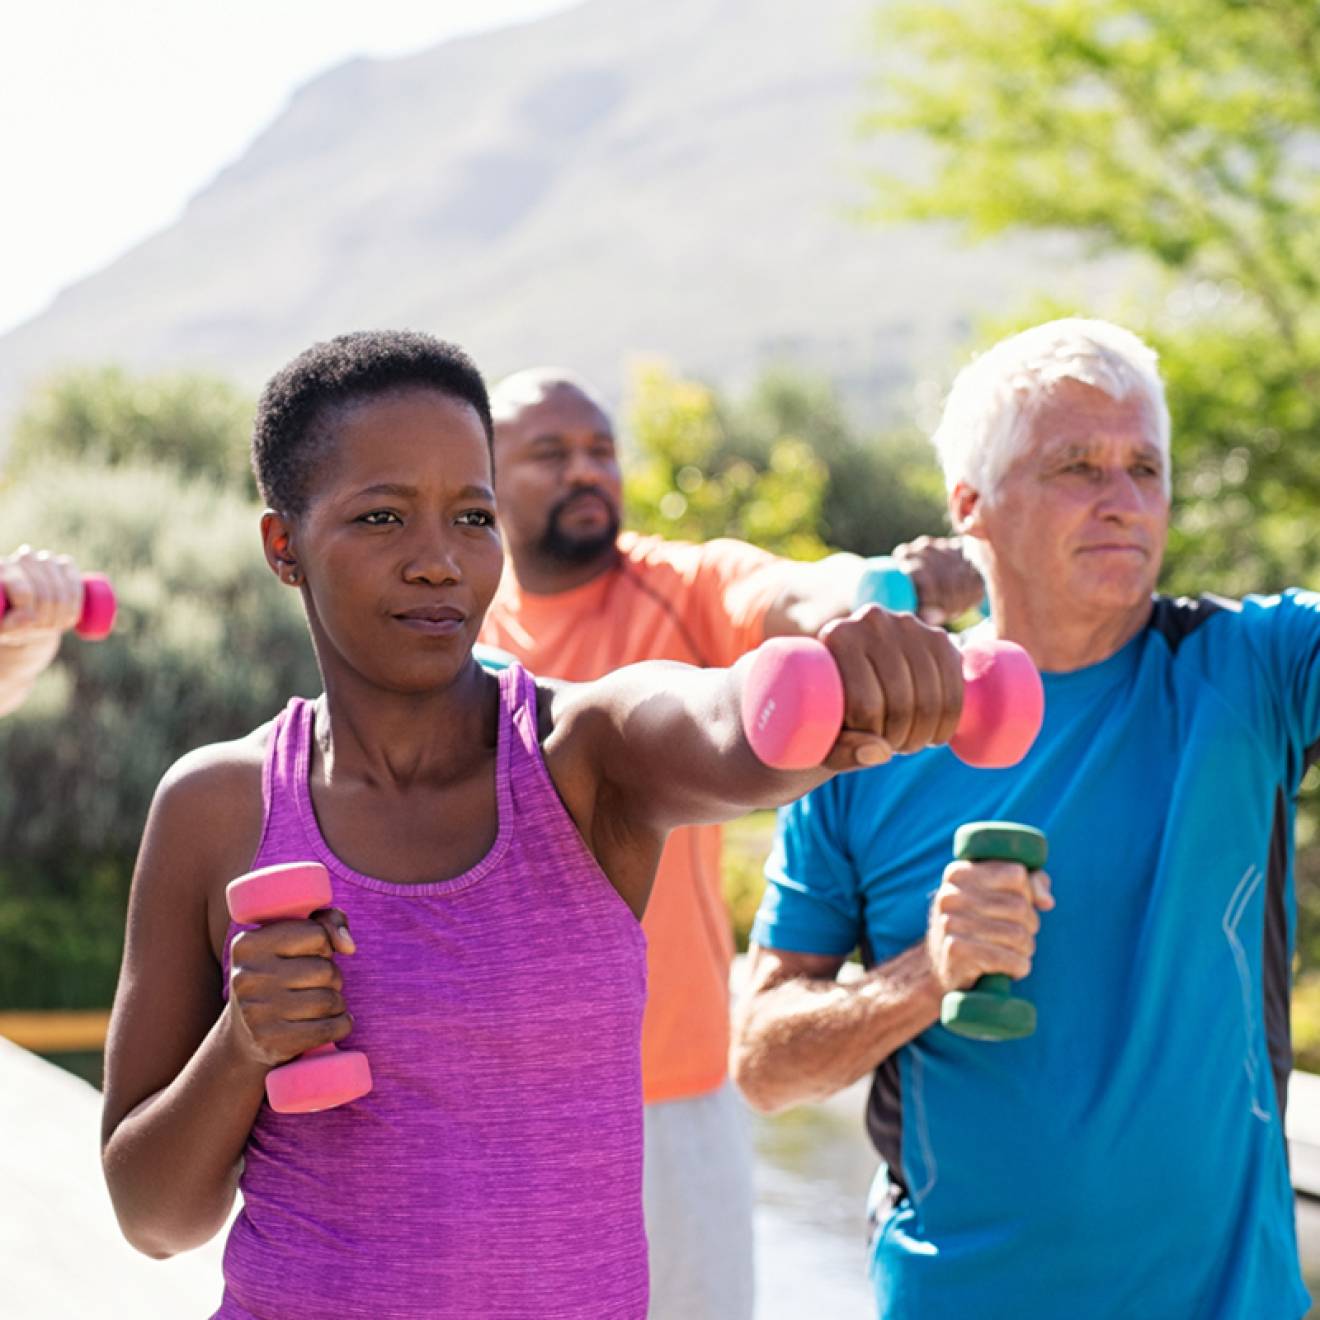 Older adults working out together with weights outdoors